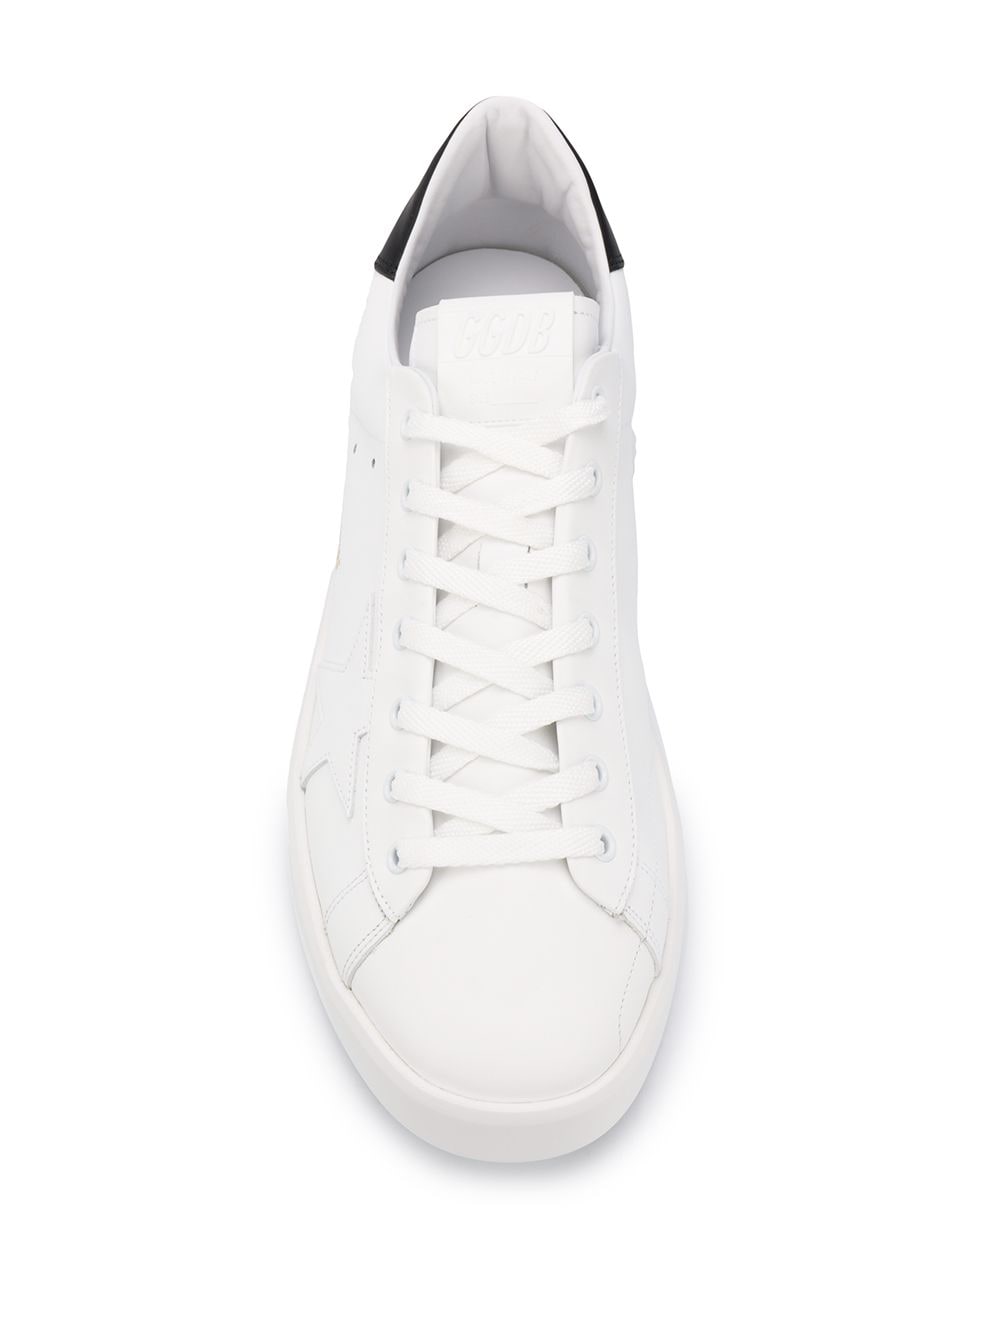 Purestar lace-up sneakers